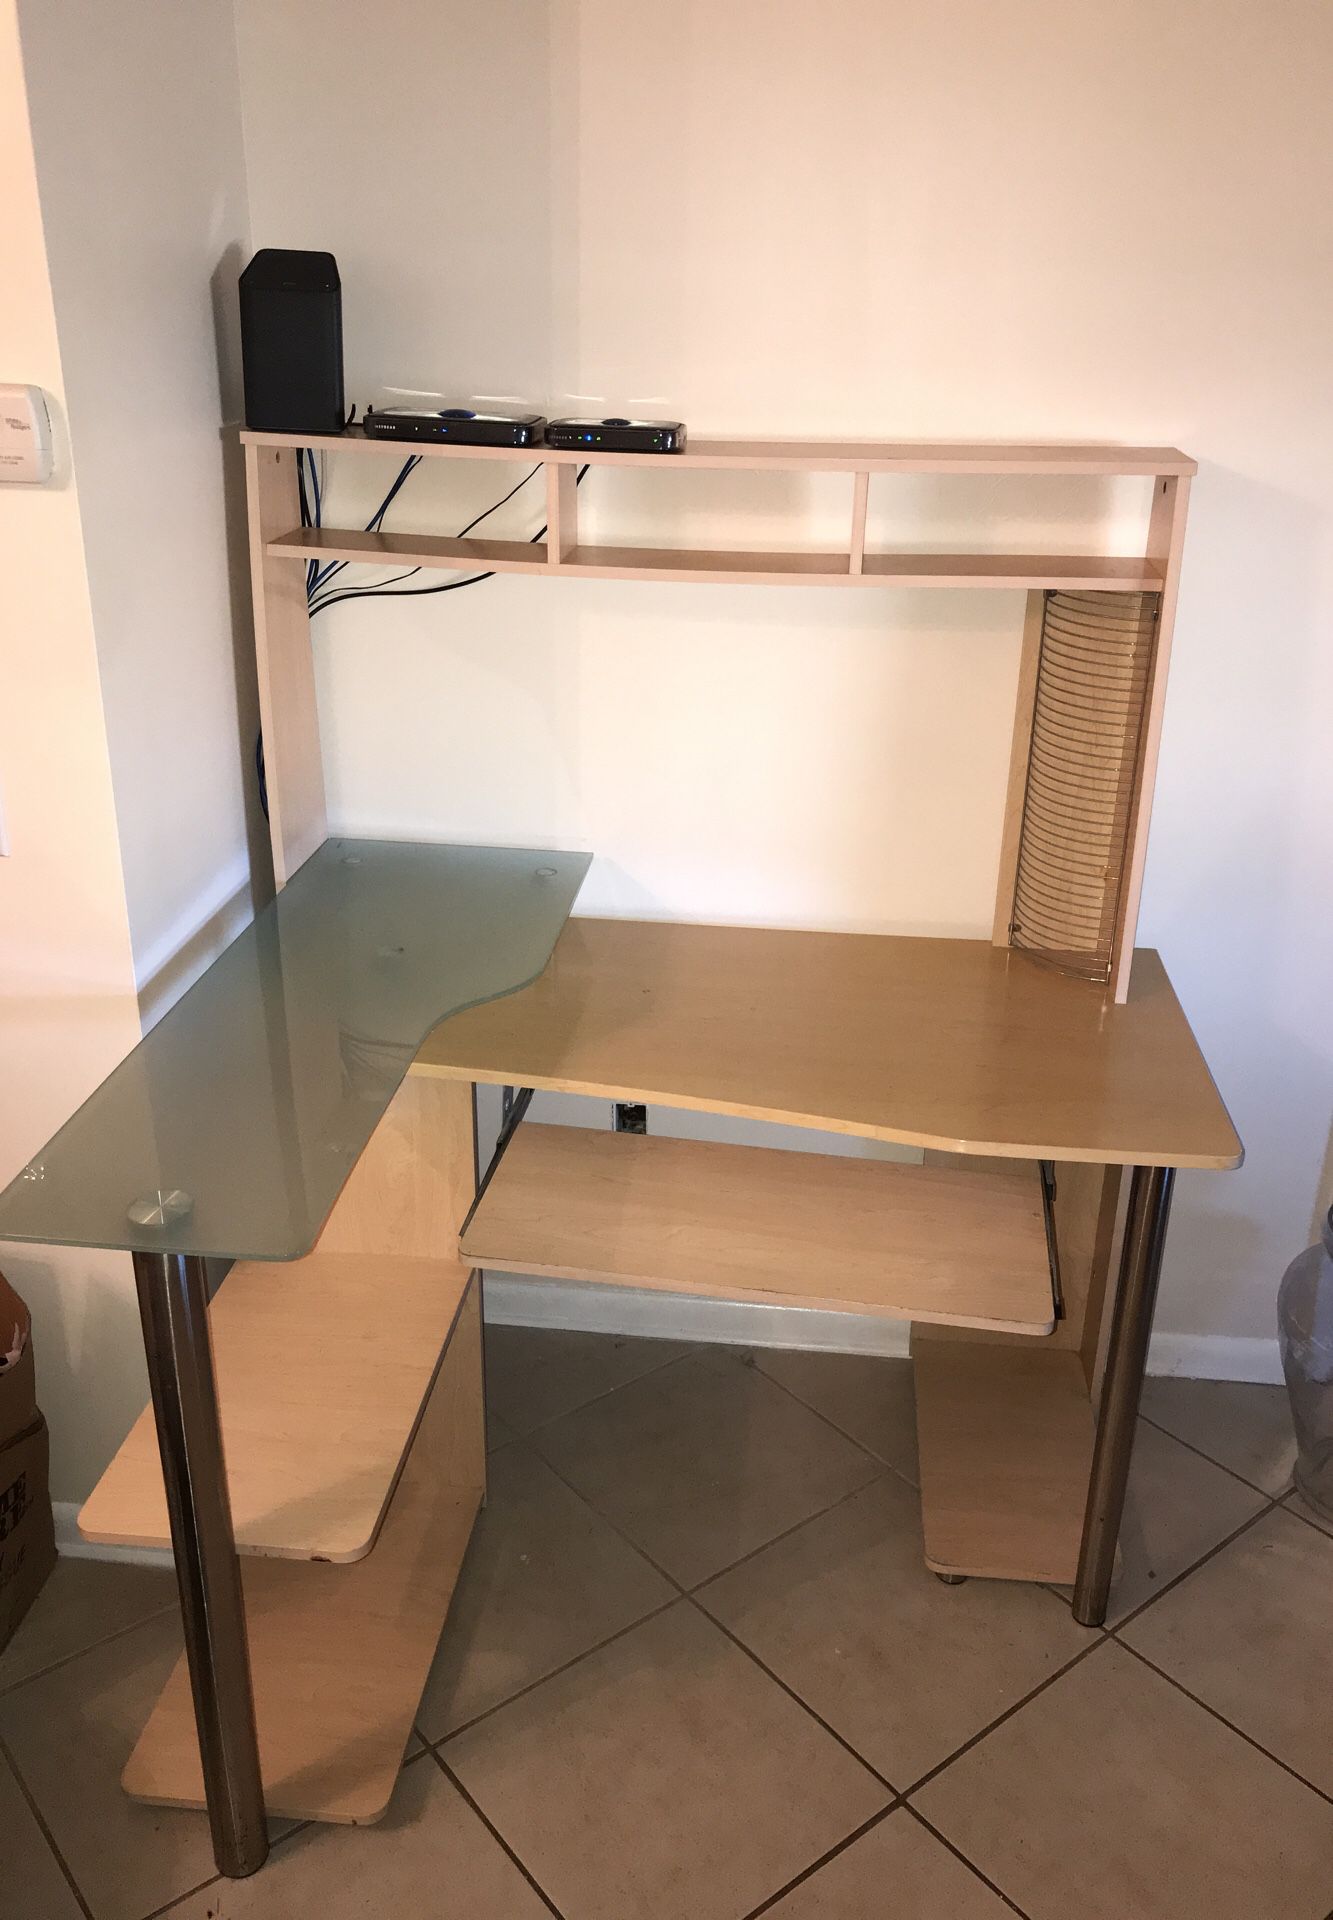 Office Computer desk with glass table and cd storage